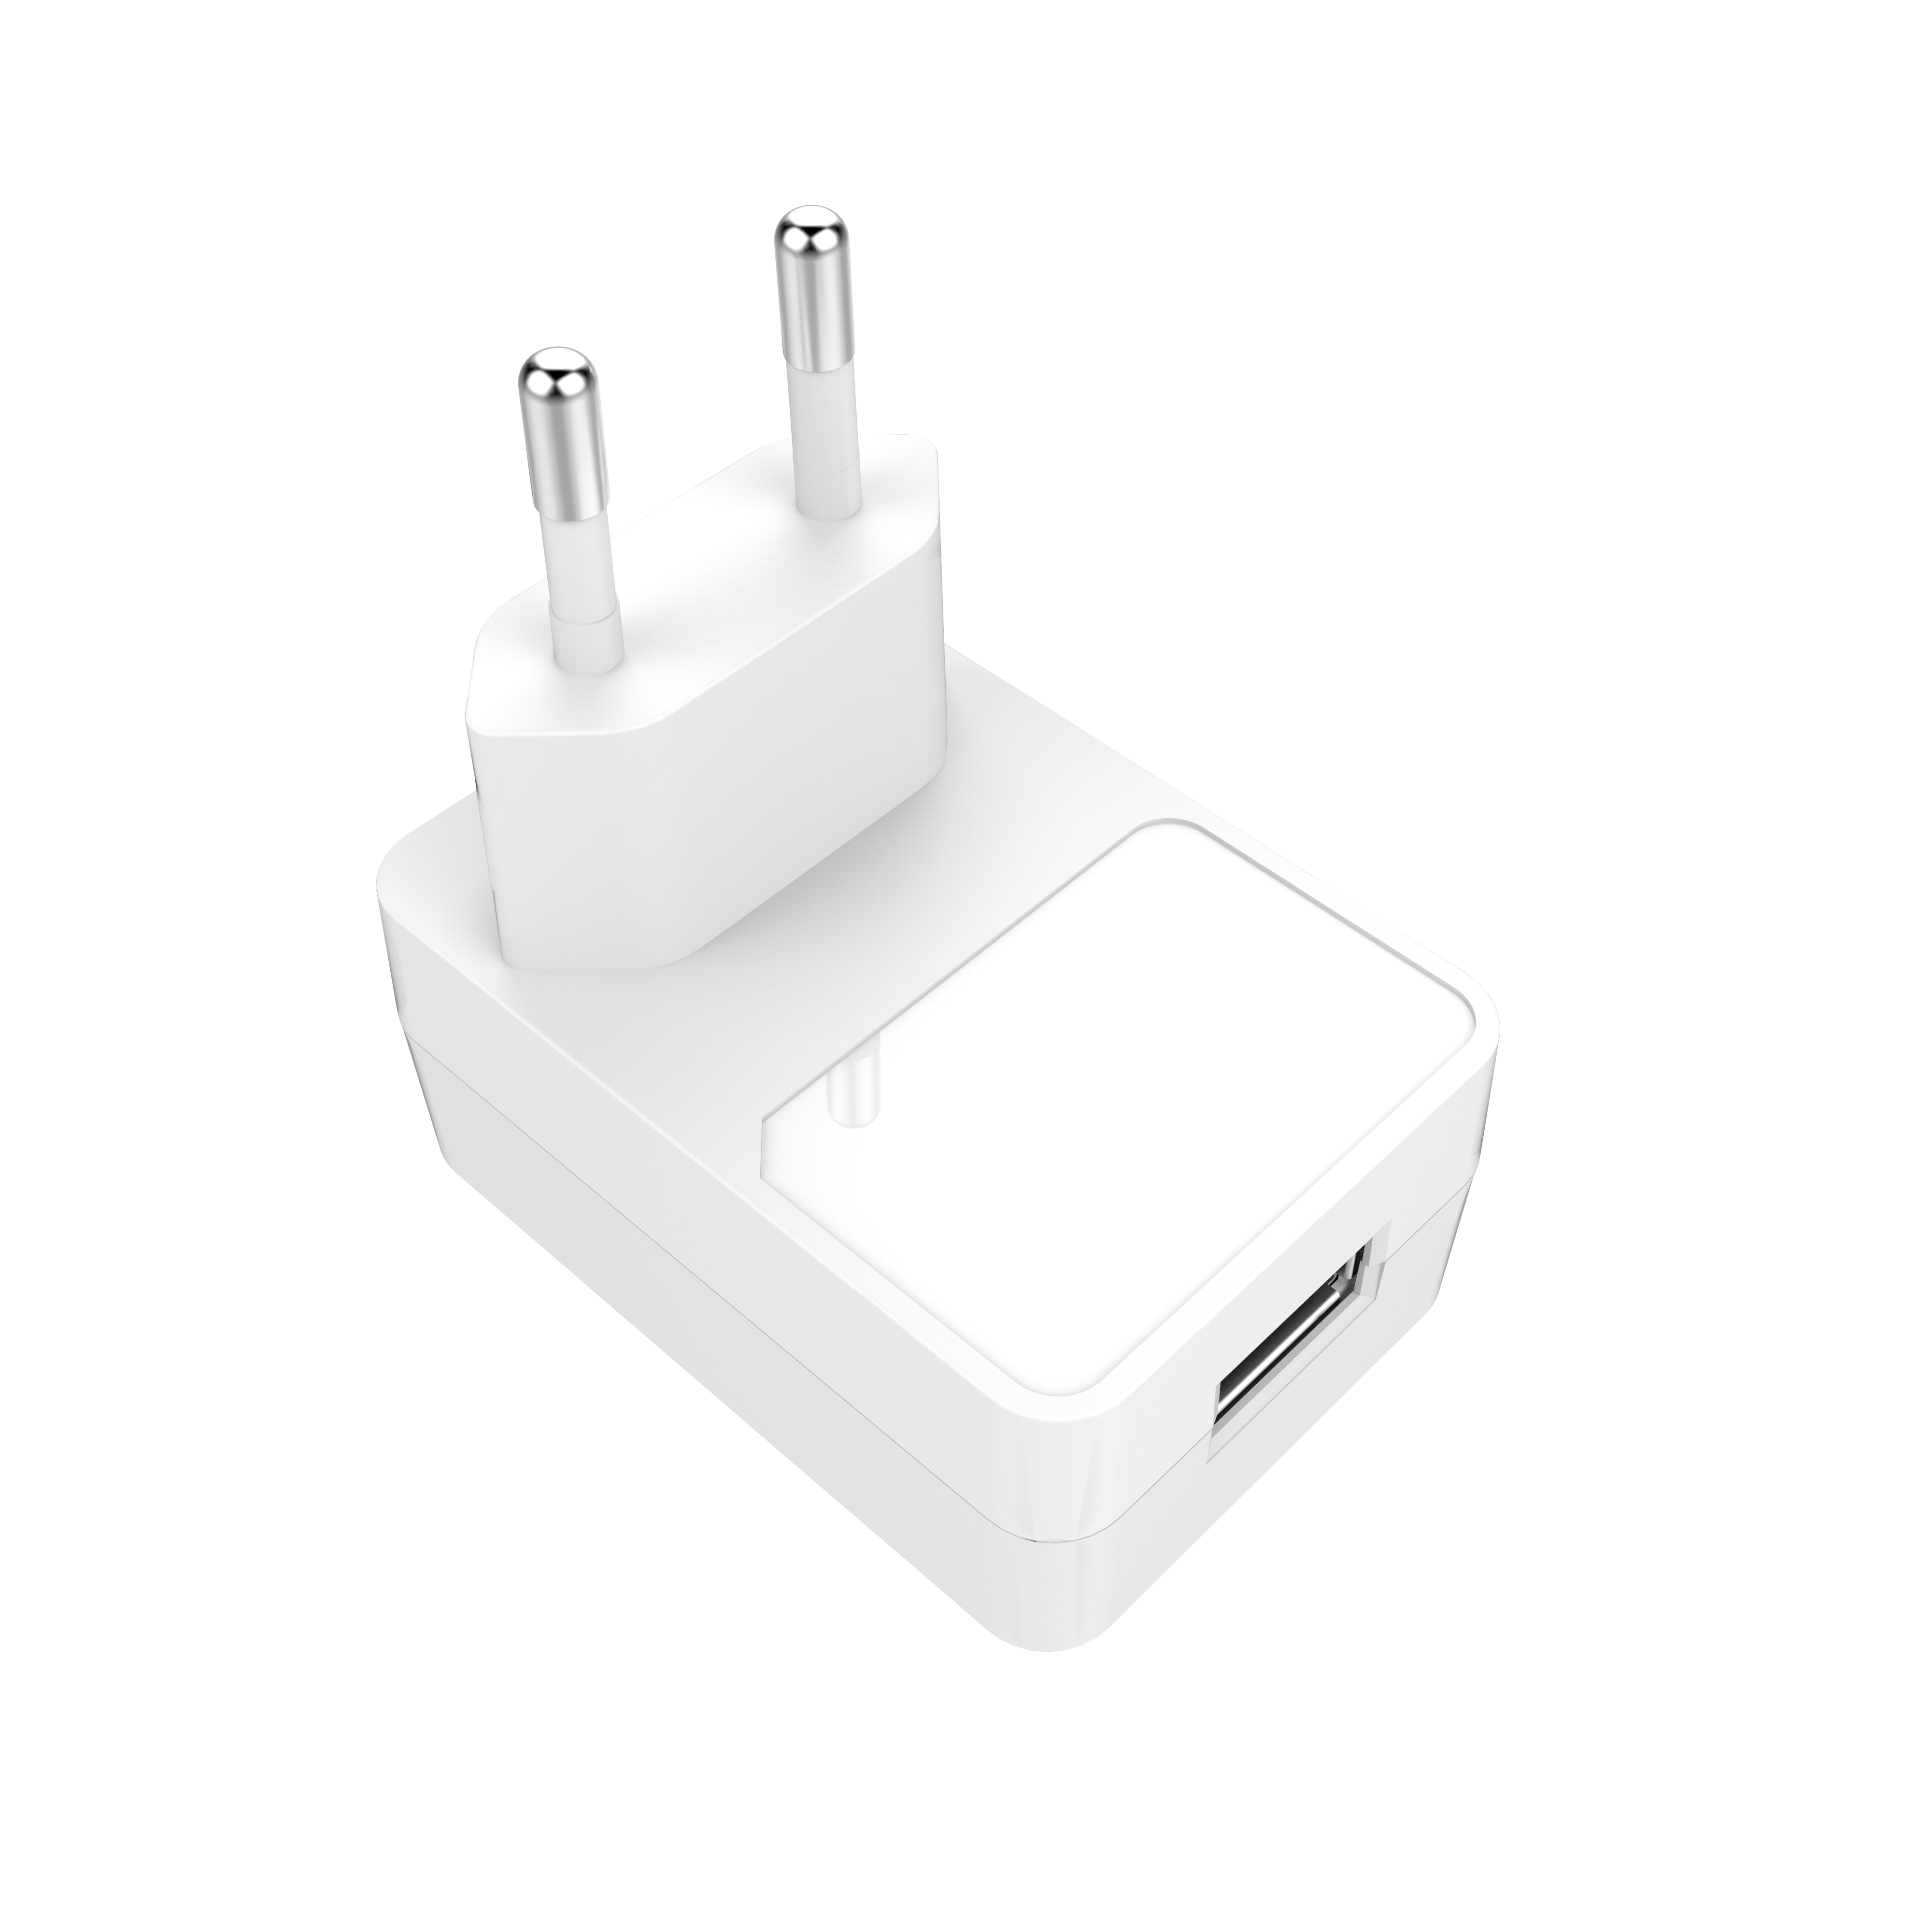 10W 5V2A USB mobile power adapter charger with Brazil plug for Brazil market